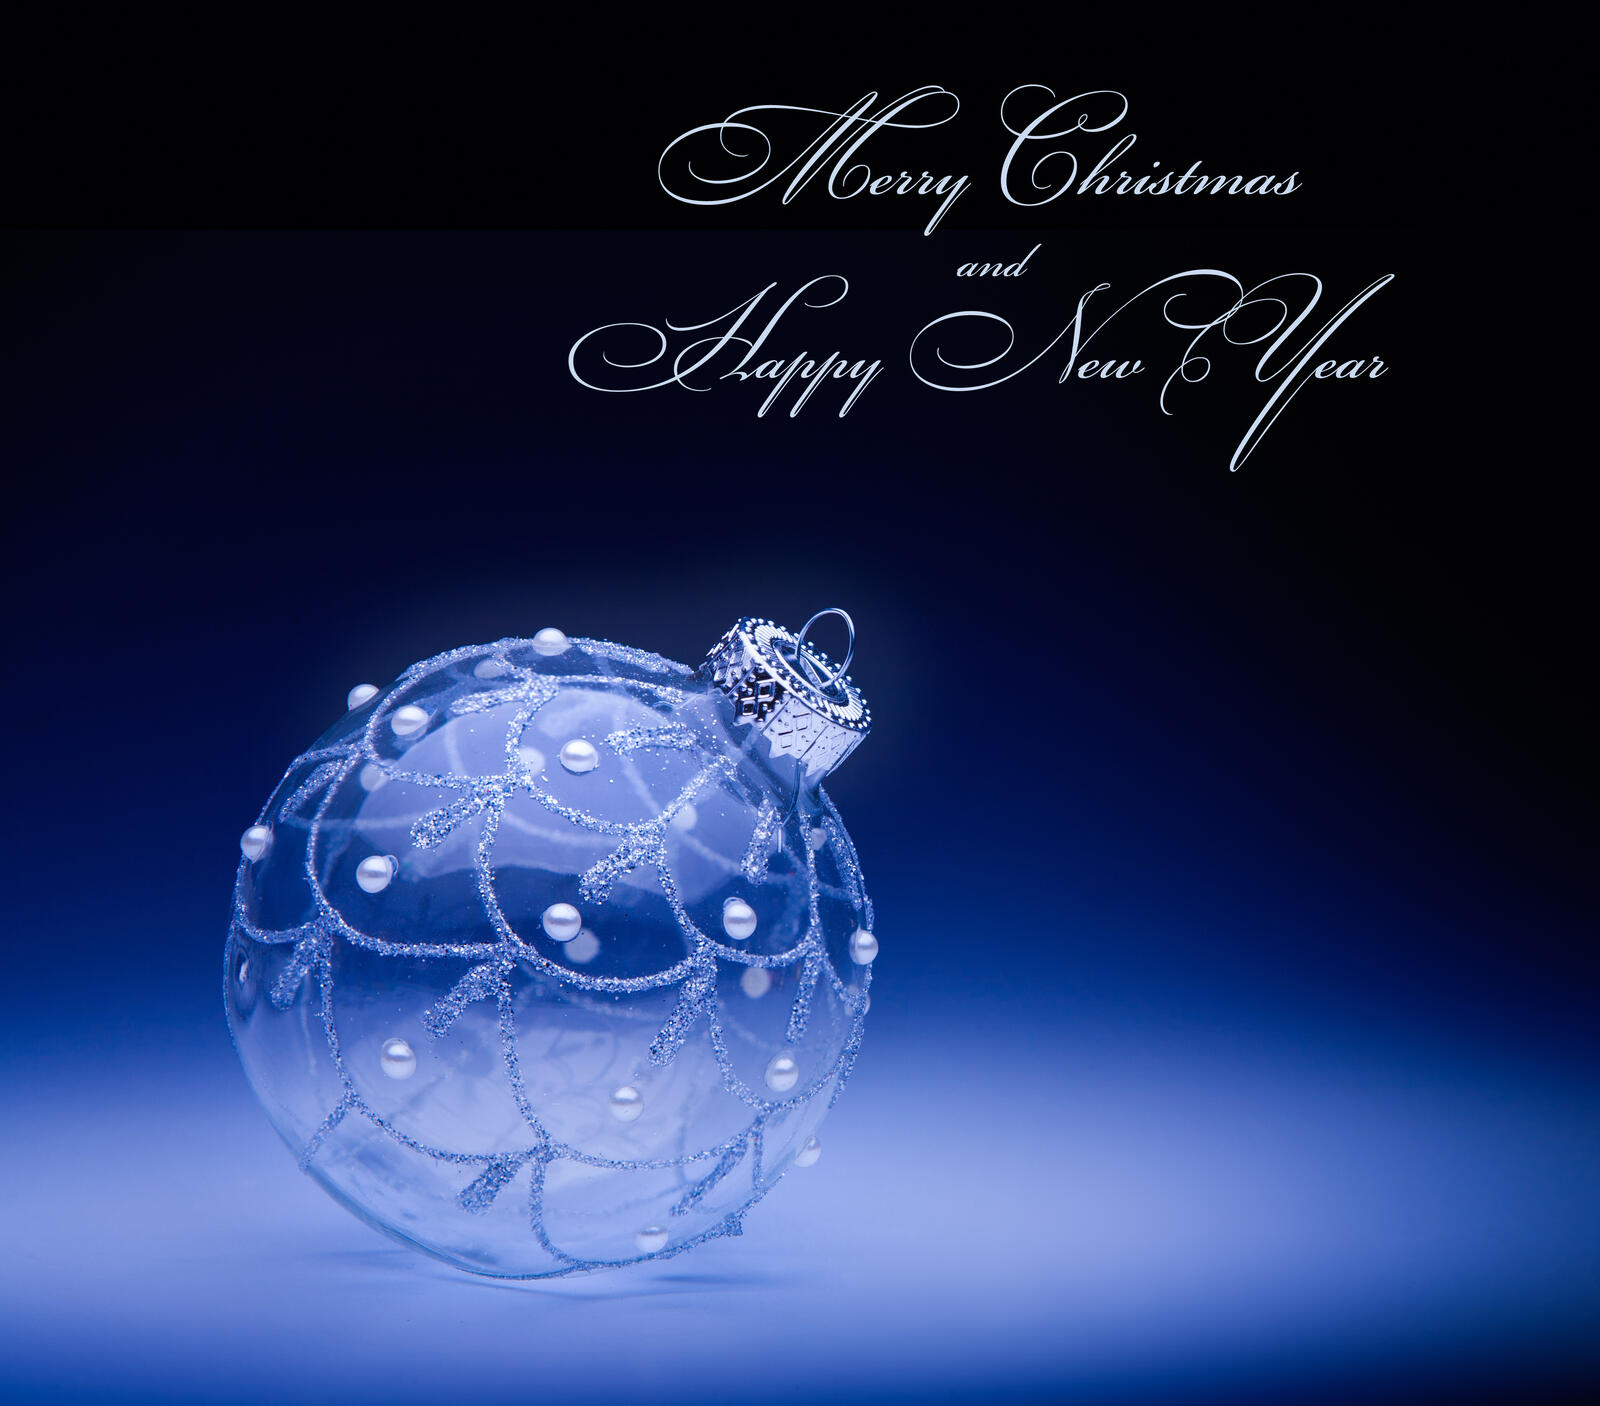 Wallpapers Happy New Year merry christmas Christmas mood on the desktop